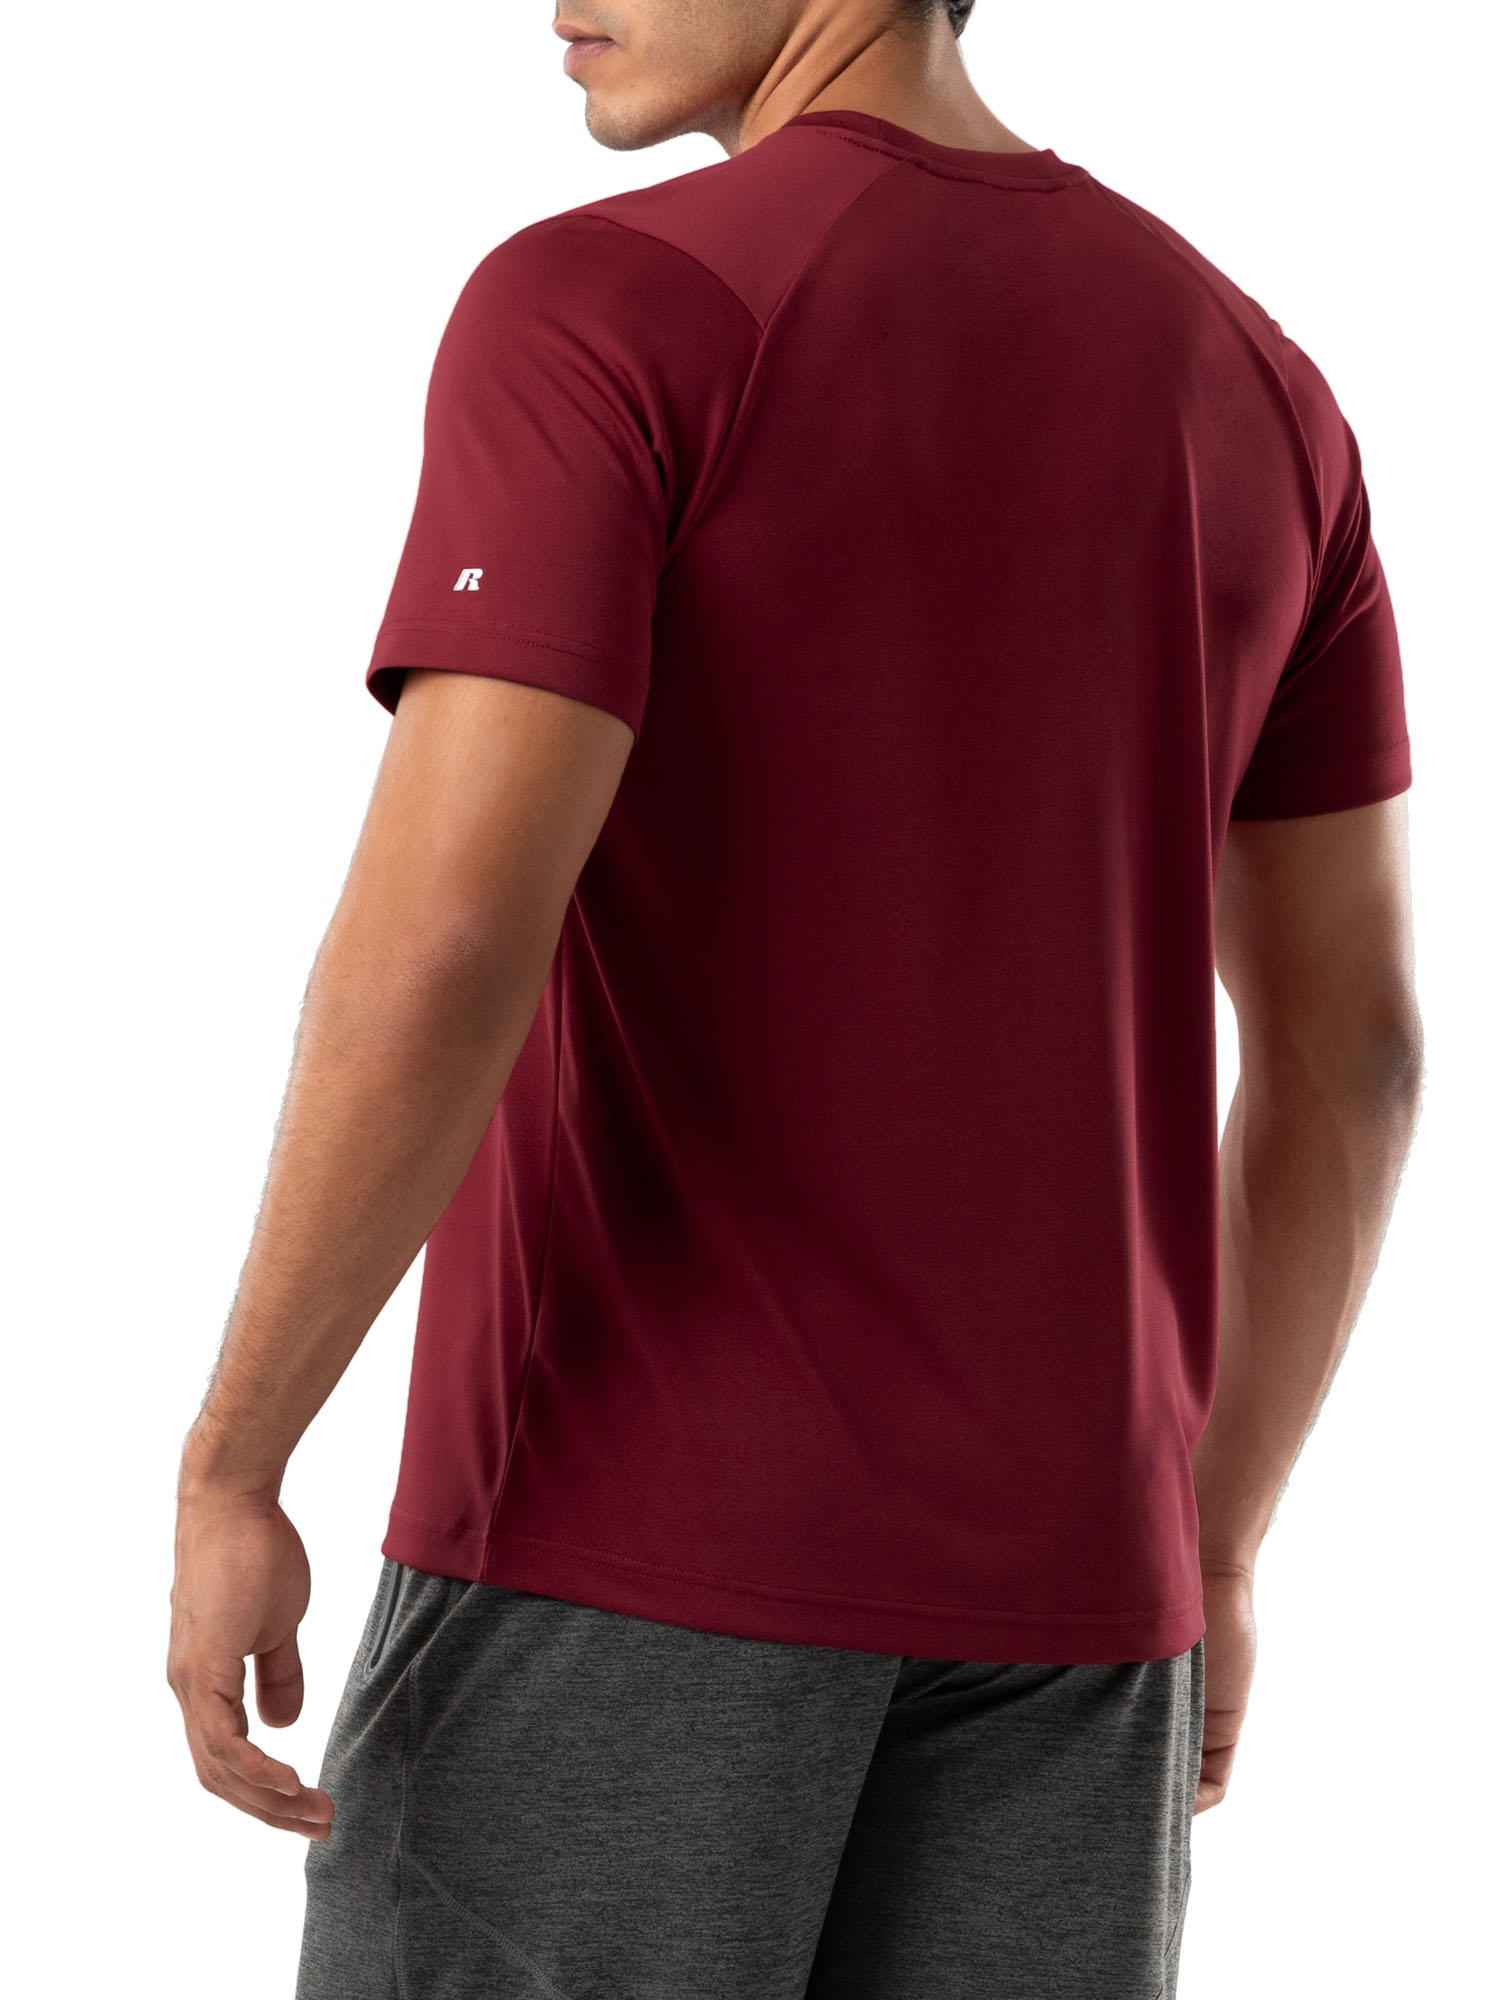 Russell Men's and Big Men's Core Jersey Active T-Shirt, up to Size 5XL - image 6 of 7